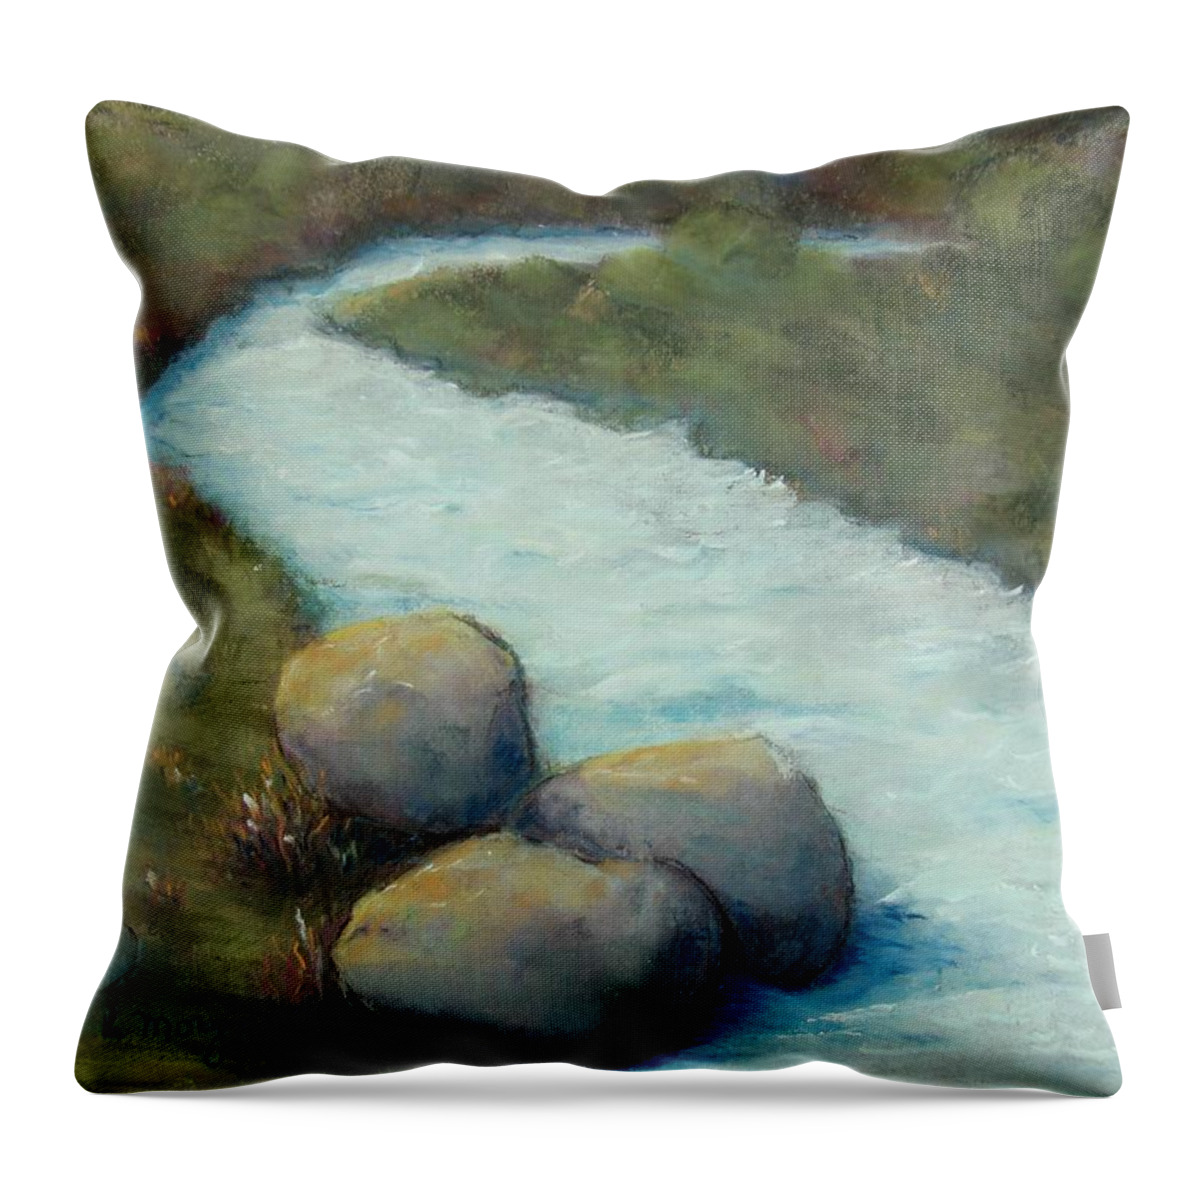 Water Throw Pillow featuring the painting A Cool Dip by Laurie Morgan